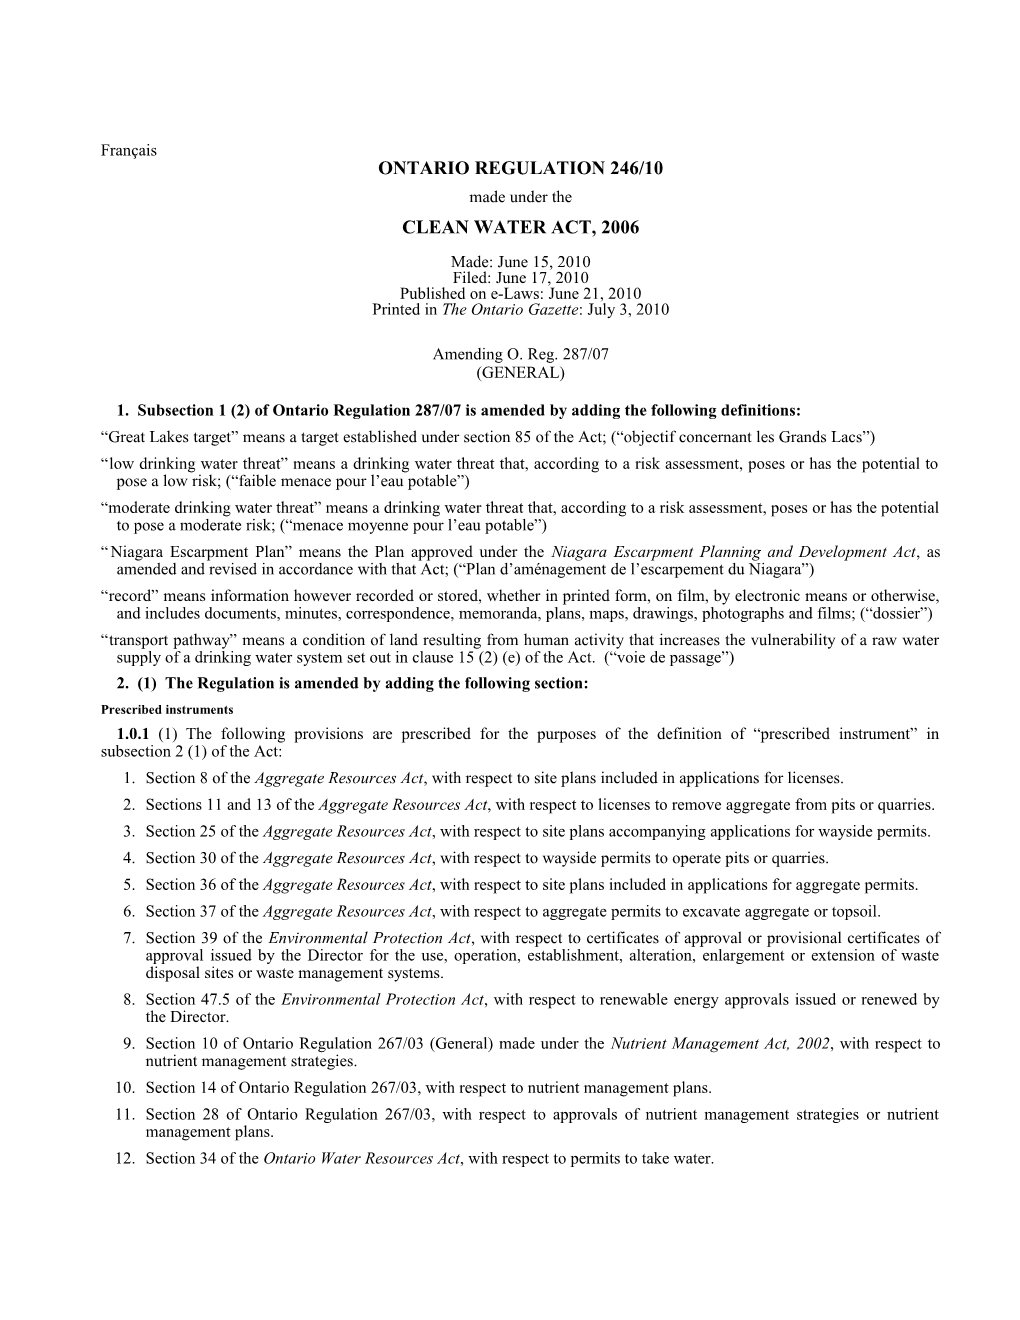 CLEAN WATER ACT, 2006 - O. Reg. 246/10